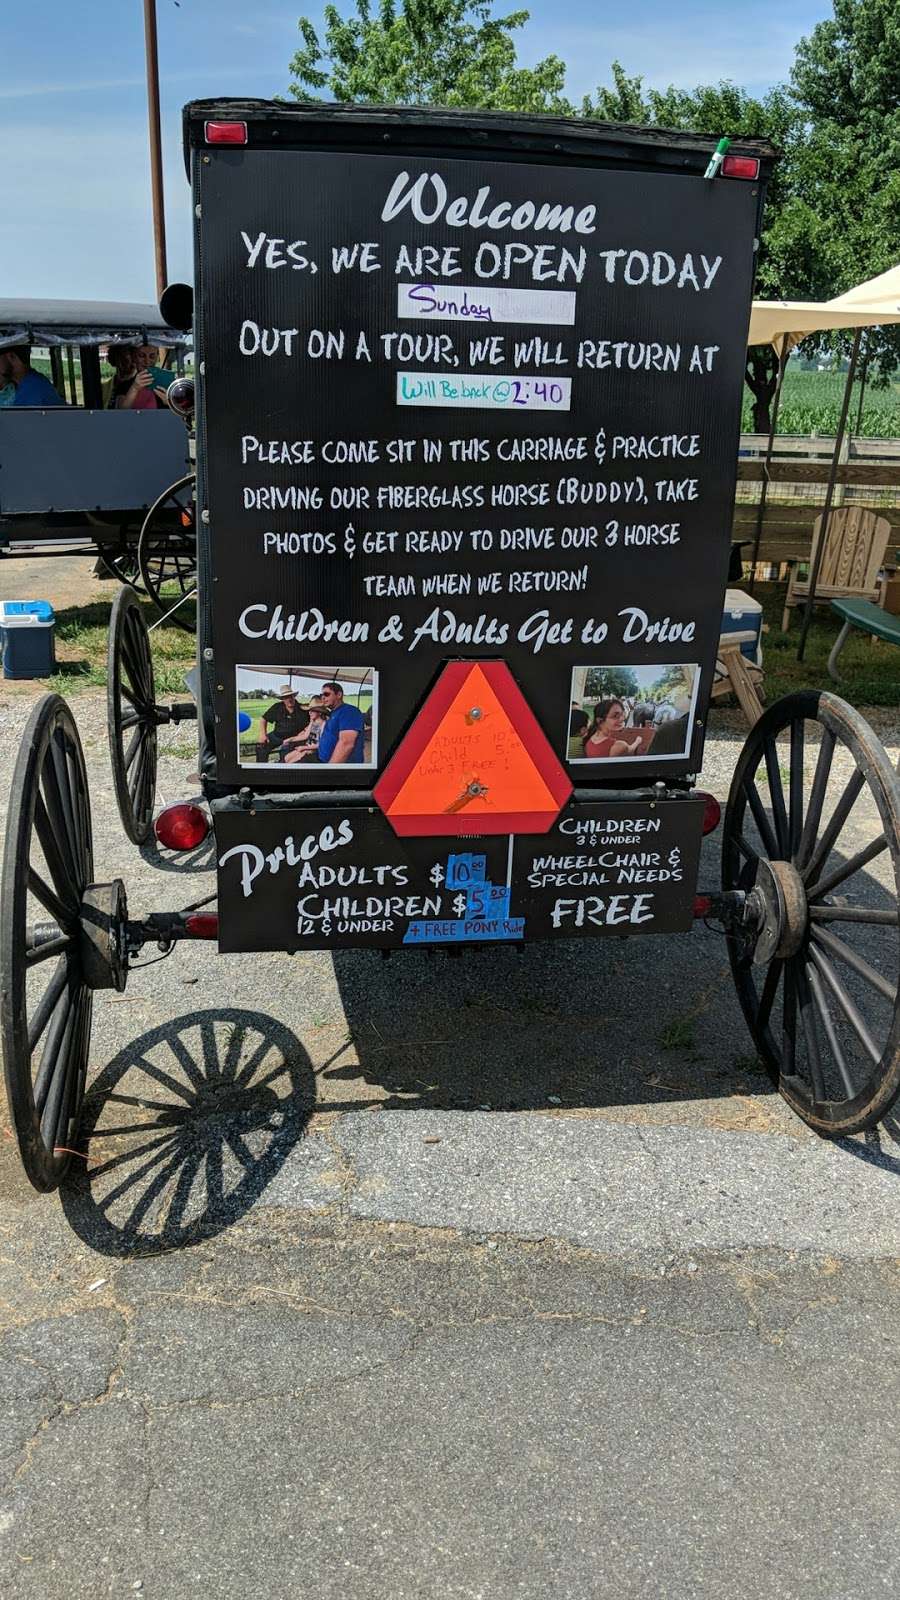 Buggy rides at Antique Barn | 3509669900000, Bird in Hand, PA 17505, USA | Phone: (717) 371-0876